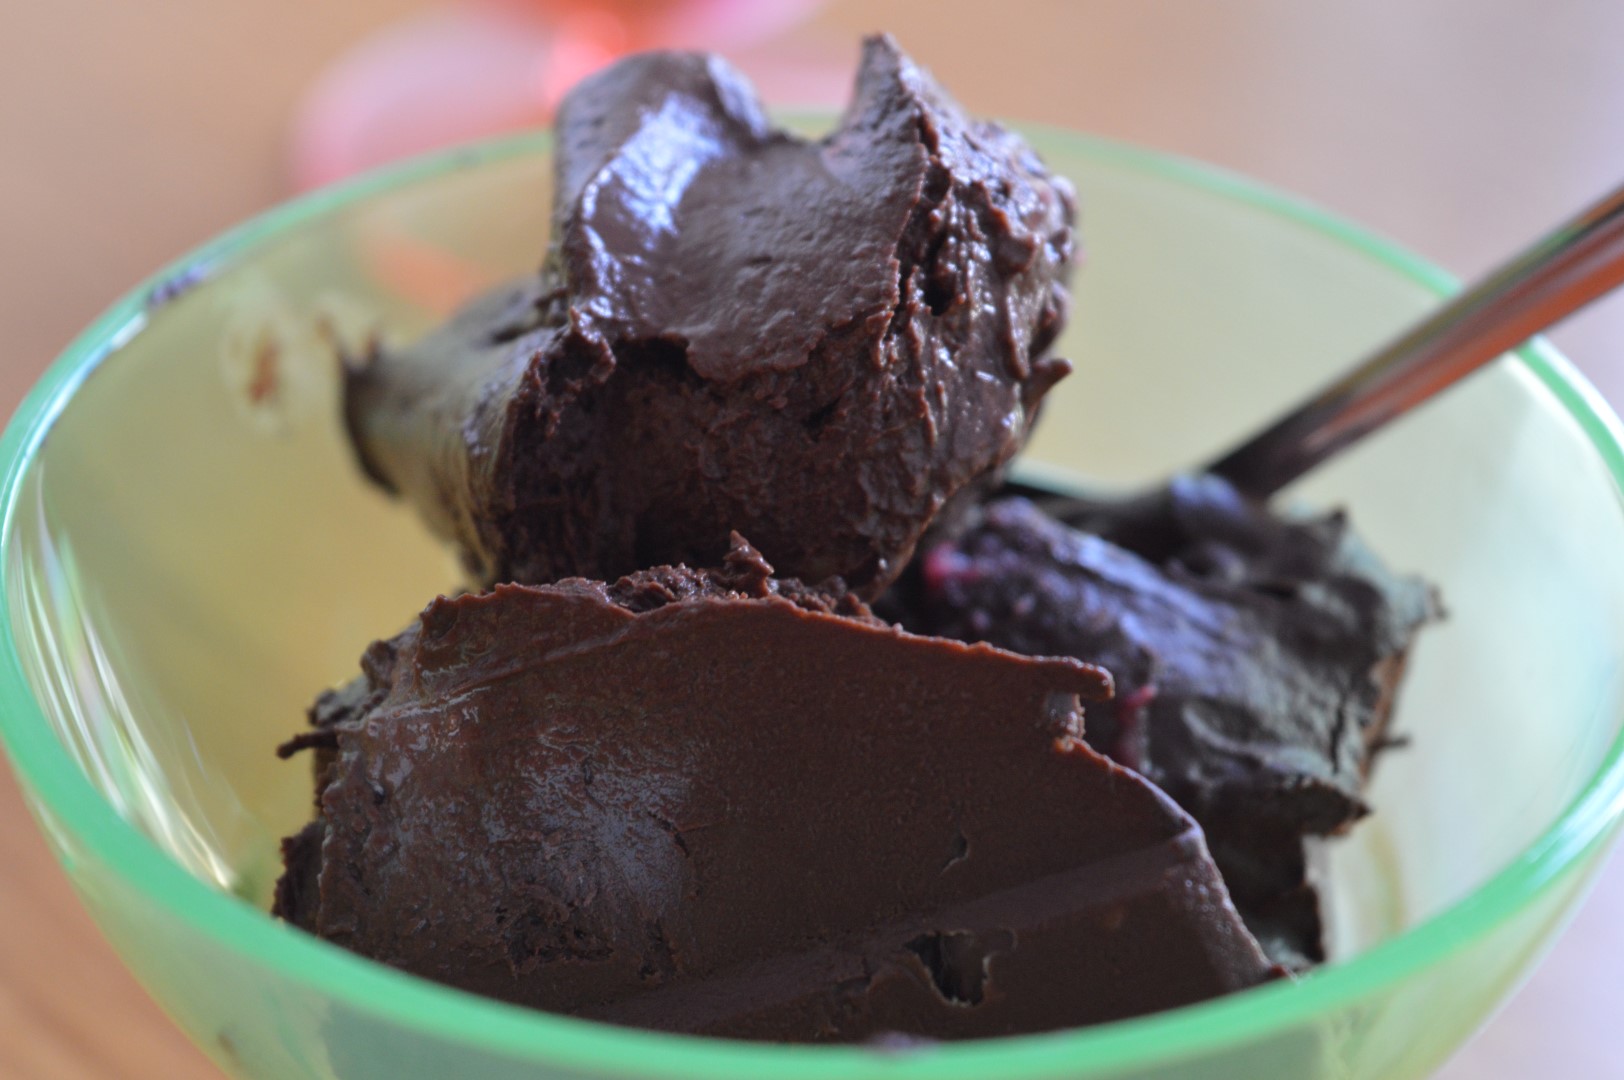 Chocolate ice cream - good vegan ice cream is hard to find! This recipe takes just minutes to make before freezing and is perfect every time! It's always a big hit thanks to it's rich chocolate flavour and smooth creamy texture! www.intolerantgourmand.com